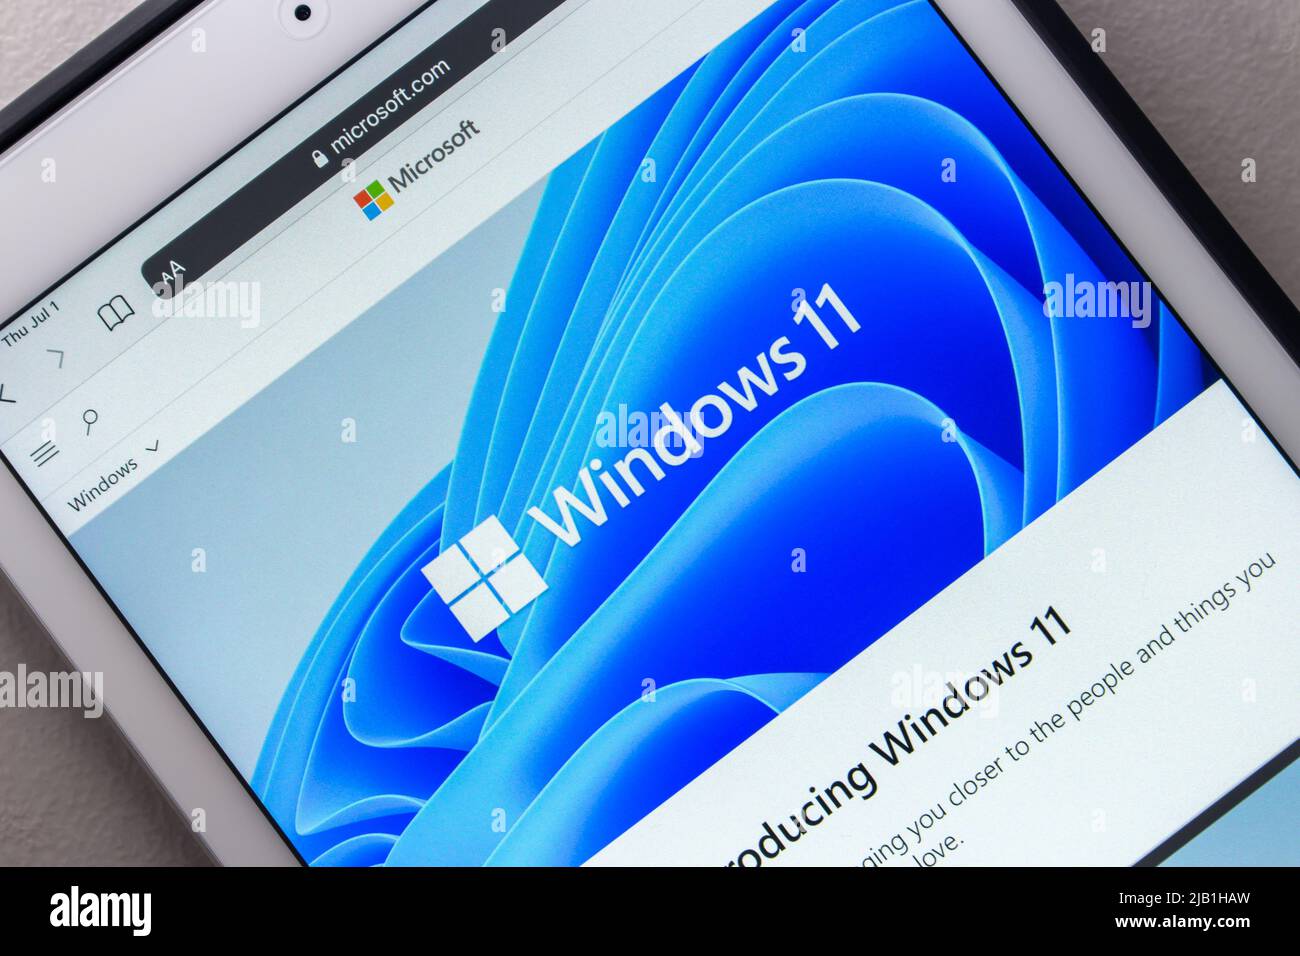 Kumamoto, JAPAN - Jul 1 2021 : Windows 11 website on tablet. Windows11 is a major release of the Windows NT operating system developed by Microsoft. Stock Photo